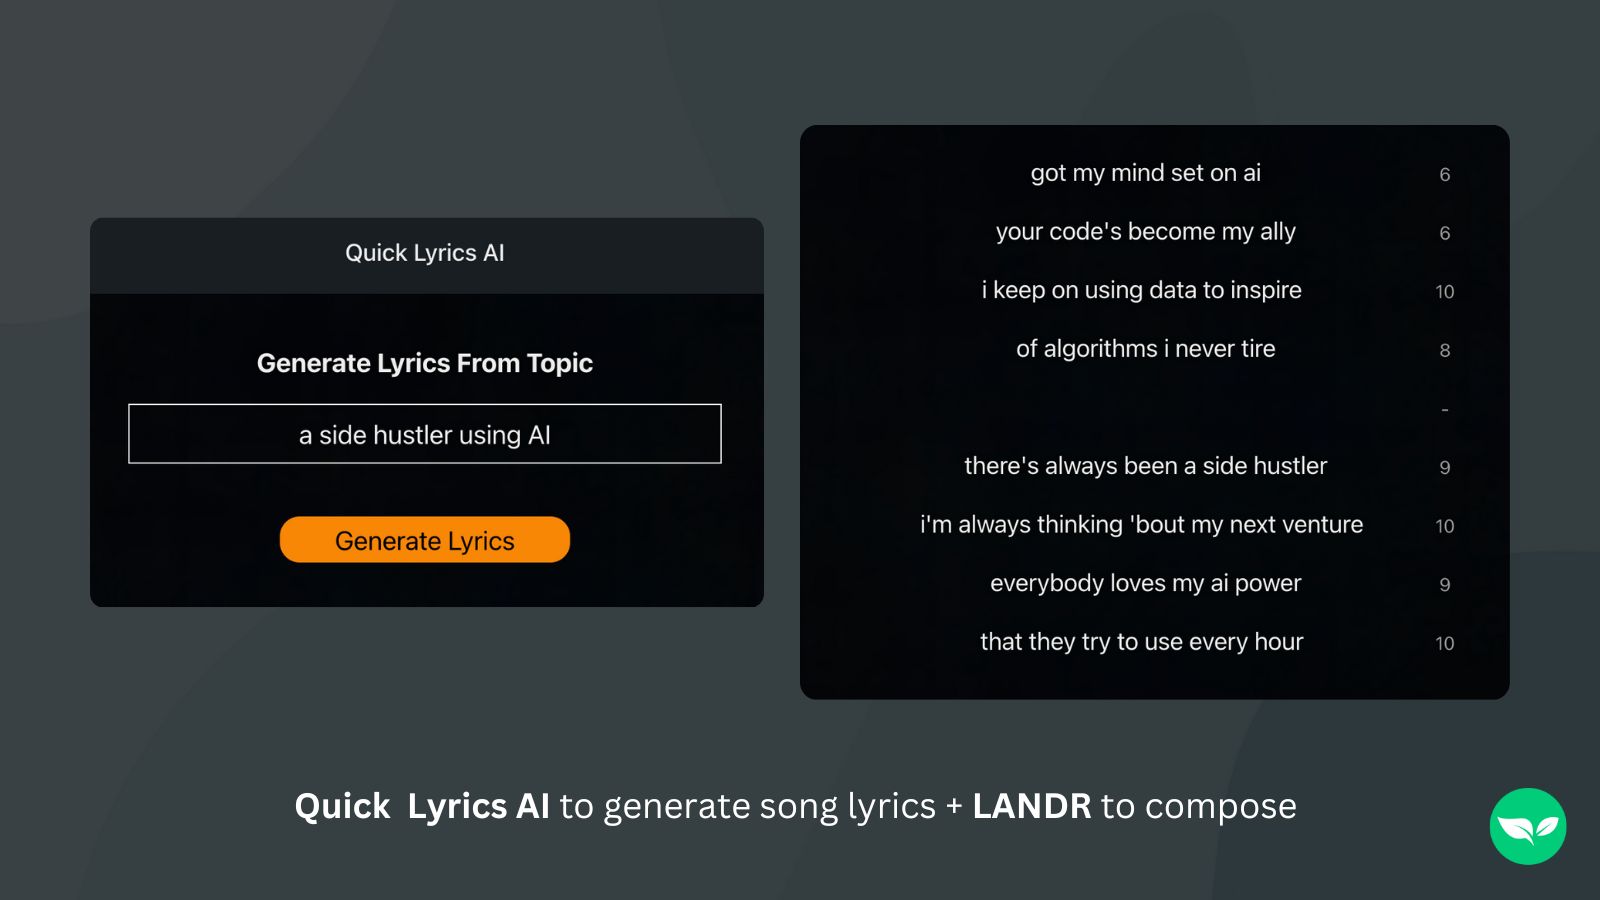 A screenshot showing Quick Lyrics AI being used to come up with song lyrics.